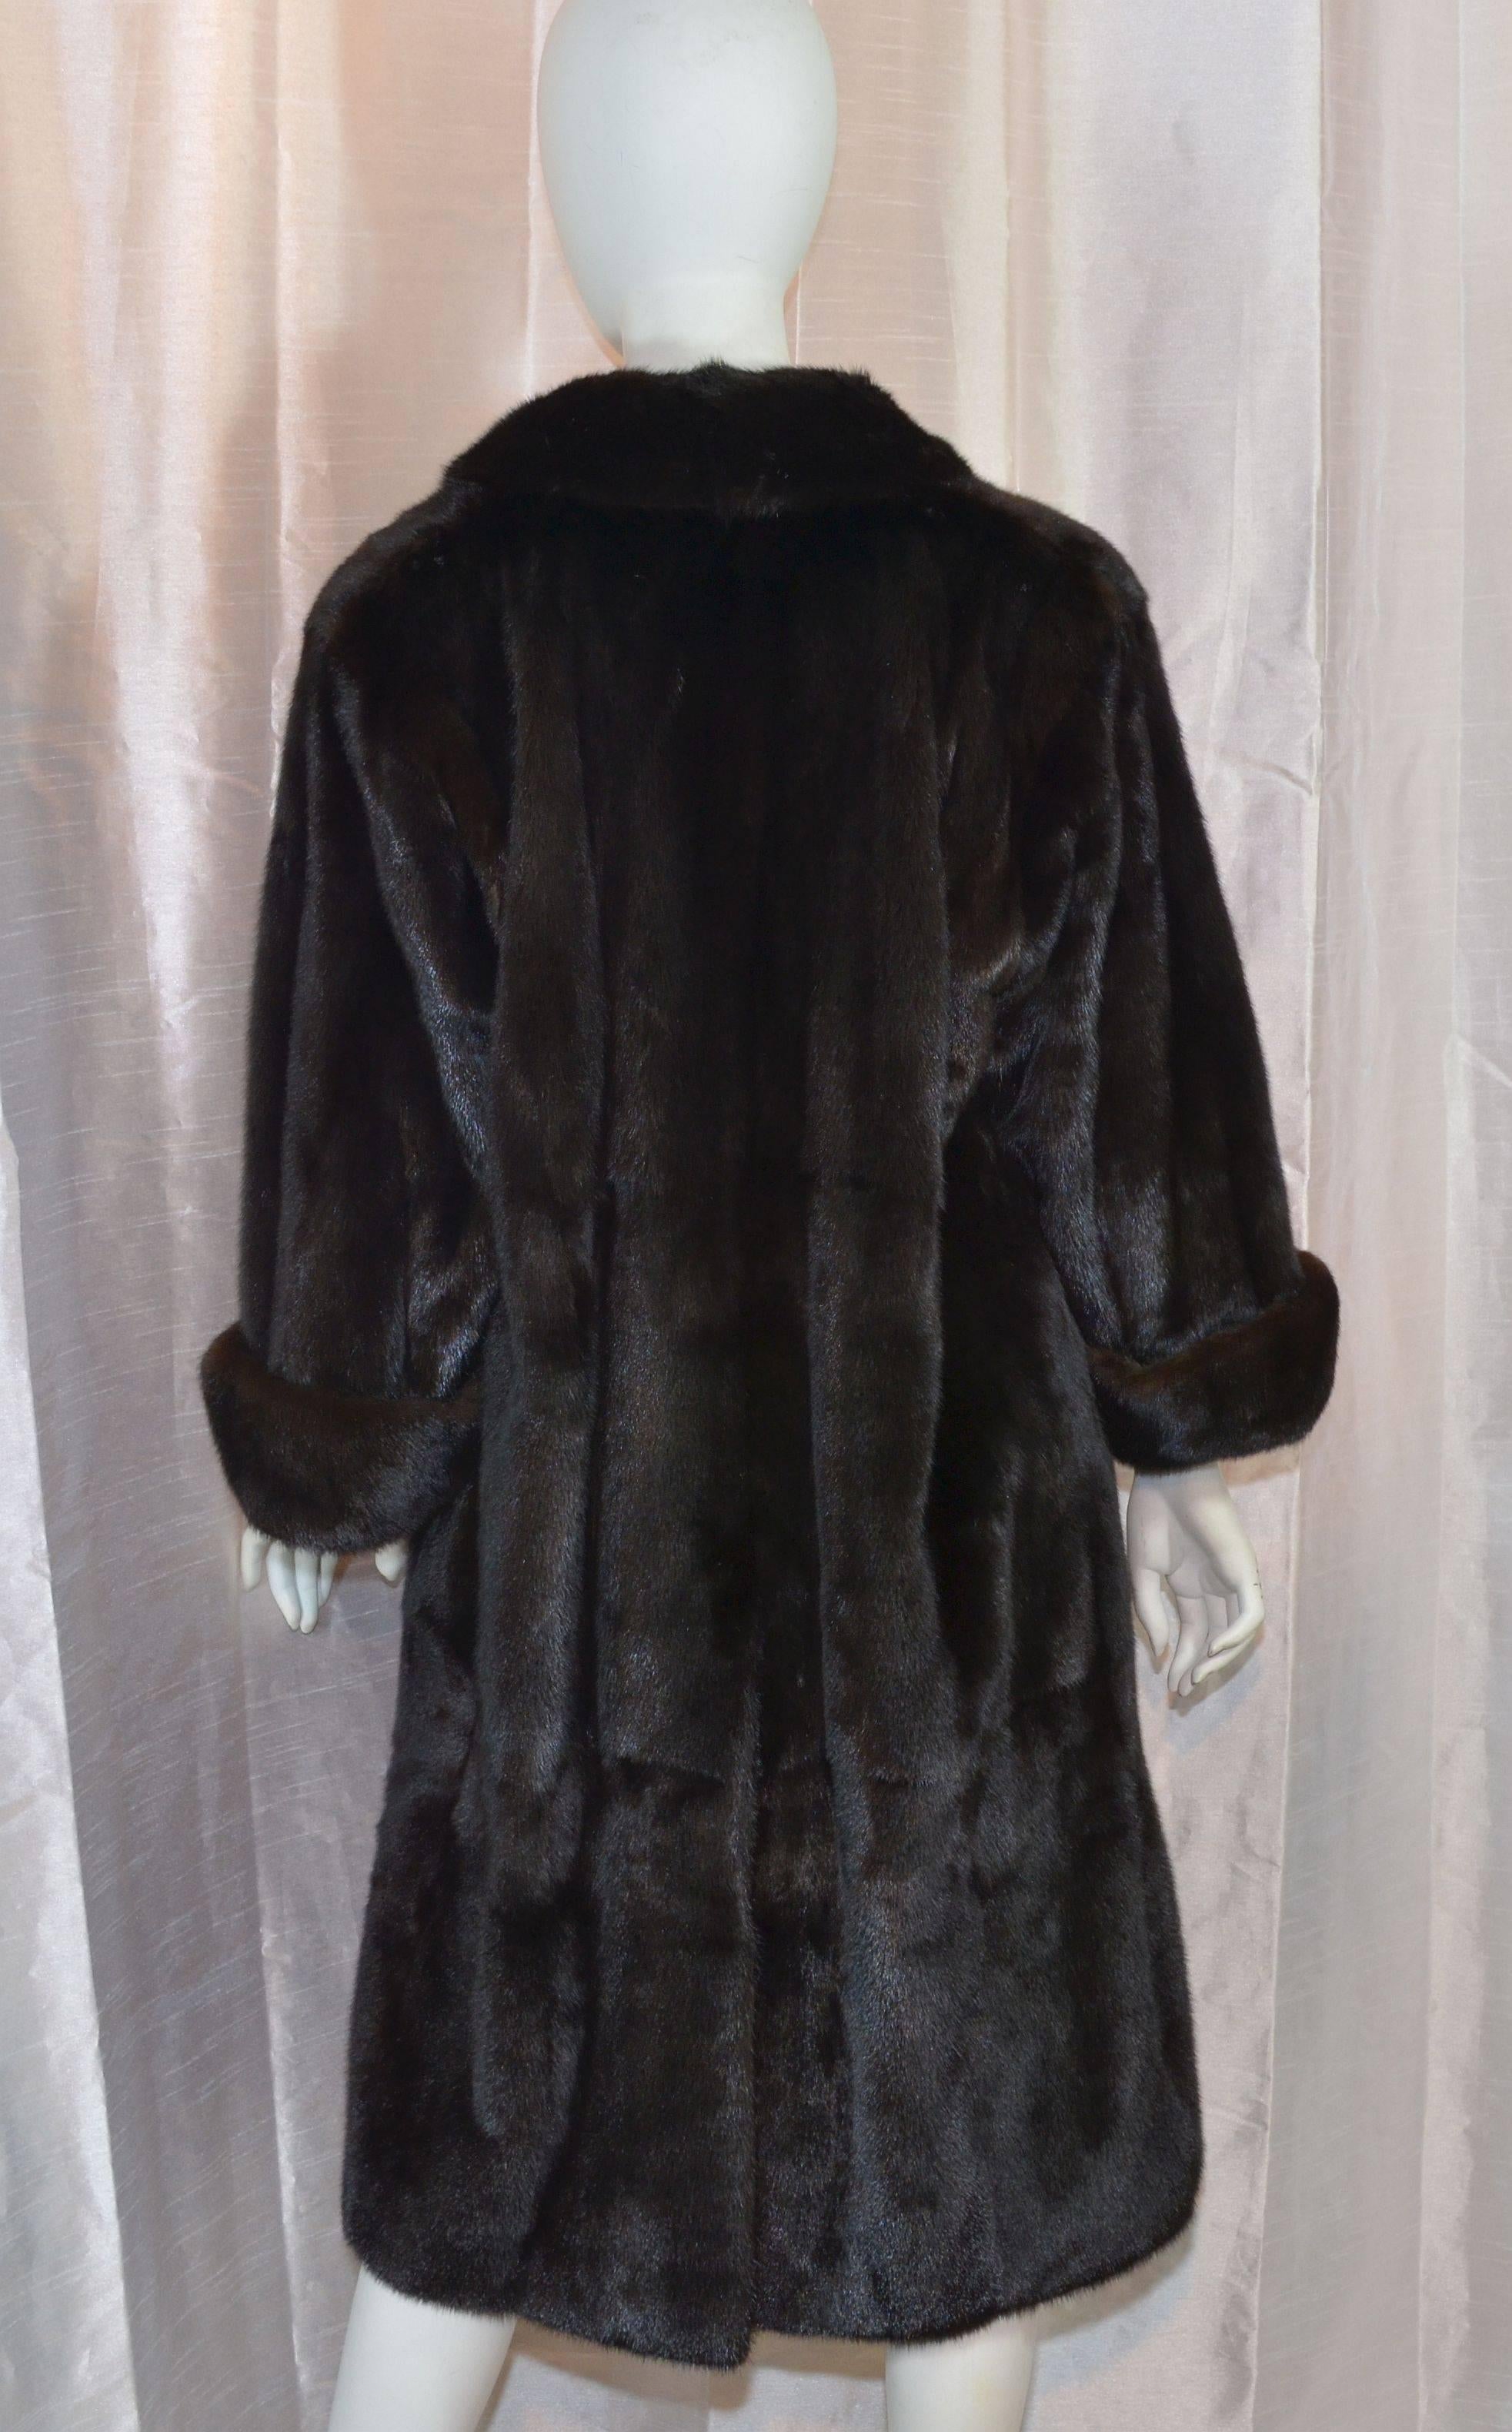 Yves Saint Laurent vintage 1980's mink coat is featured in a dark, almost black, brown mink fur with one button fastening, cuffed sleeves, full YSL logo jacquard lining, and two slip pockets at the hips. Coat is in excellent condition with no signs